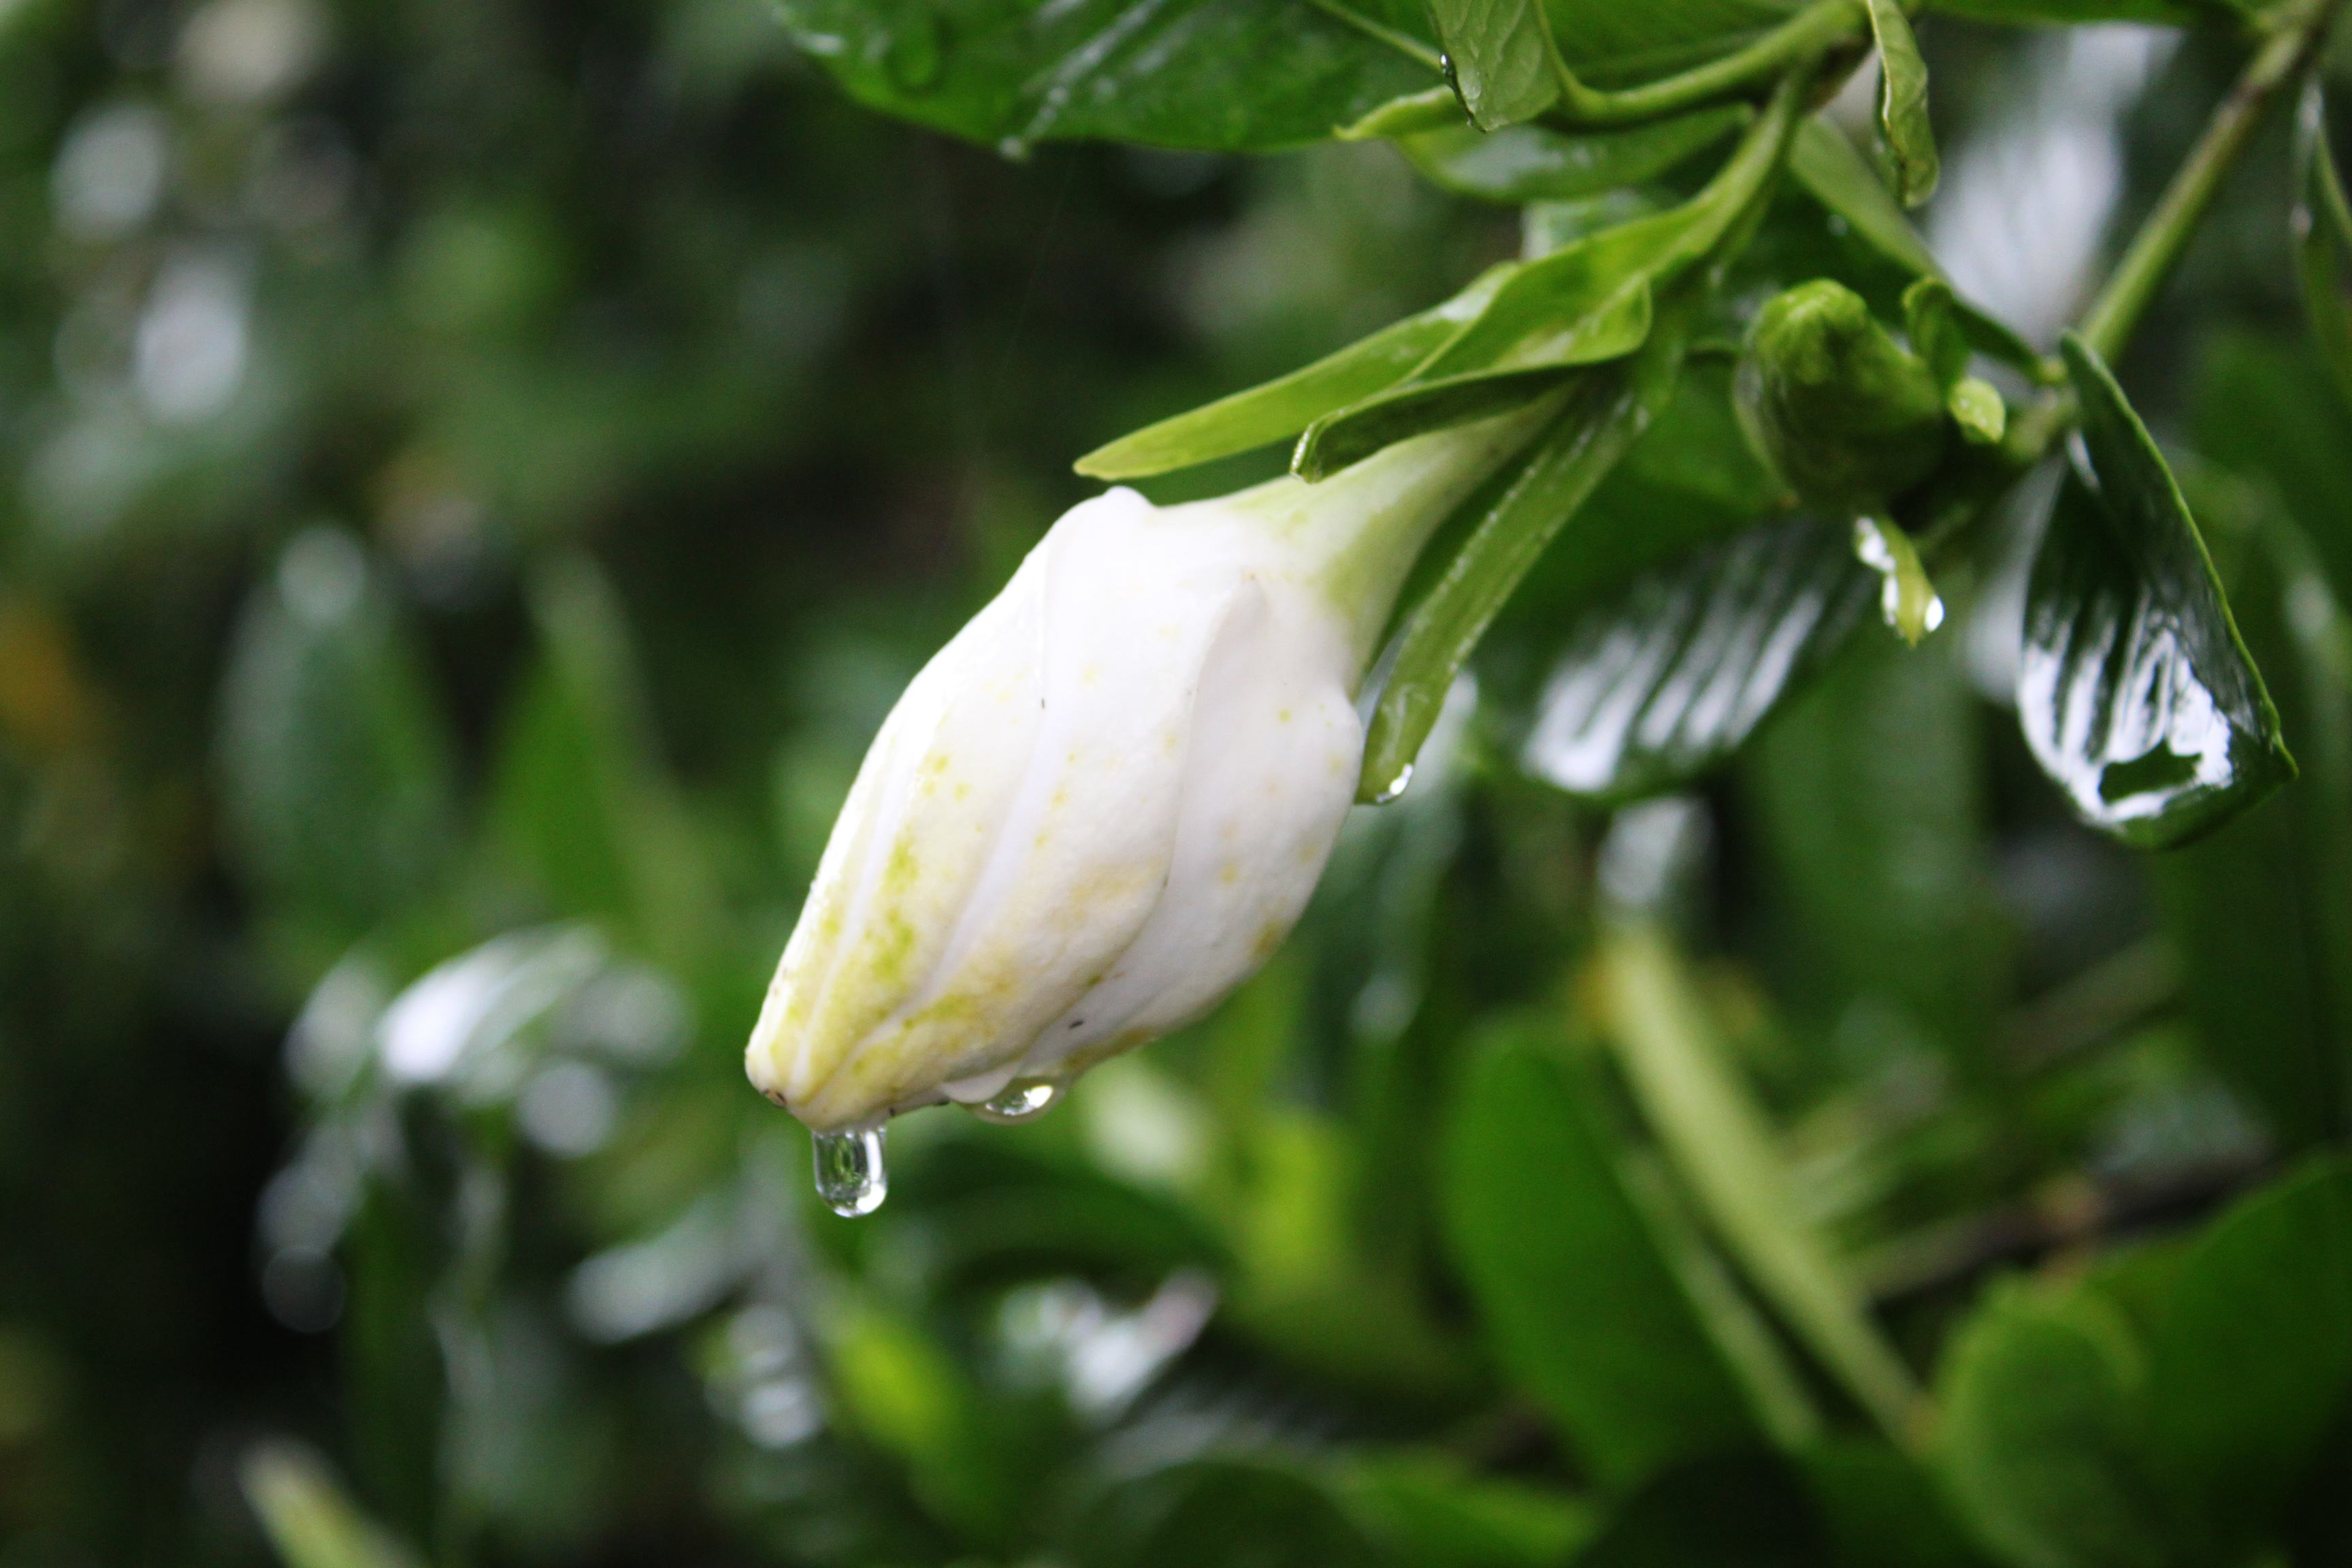 He Gui " Cape jasmine is spent " the secret that fashionable whole nation must say